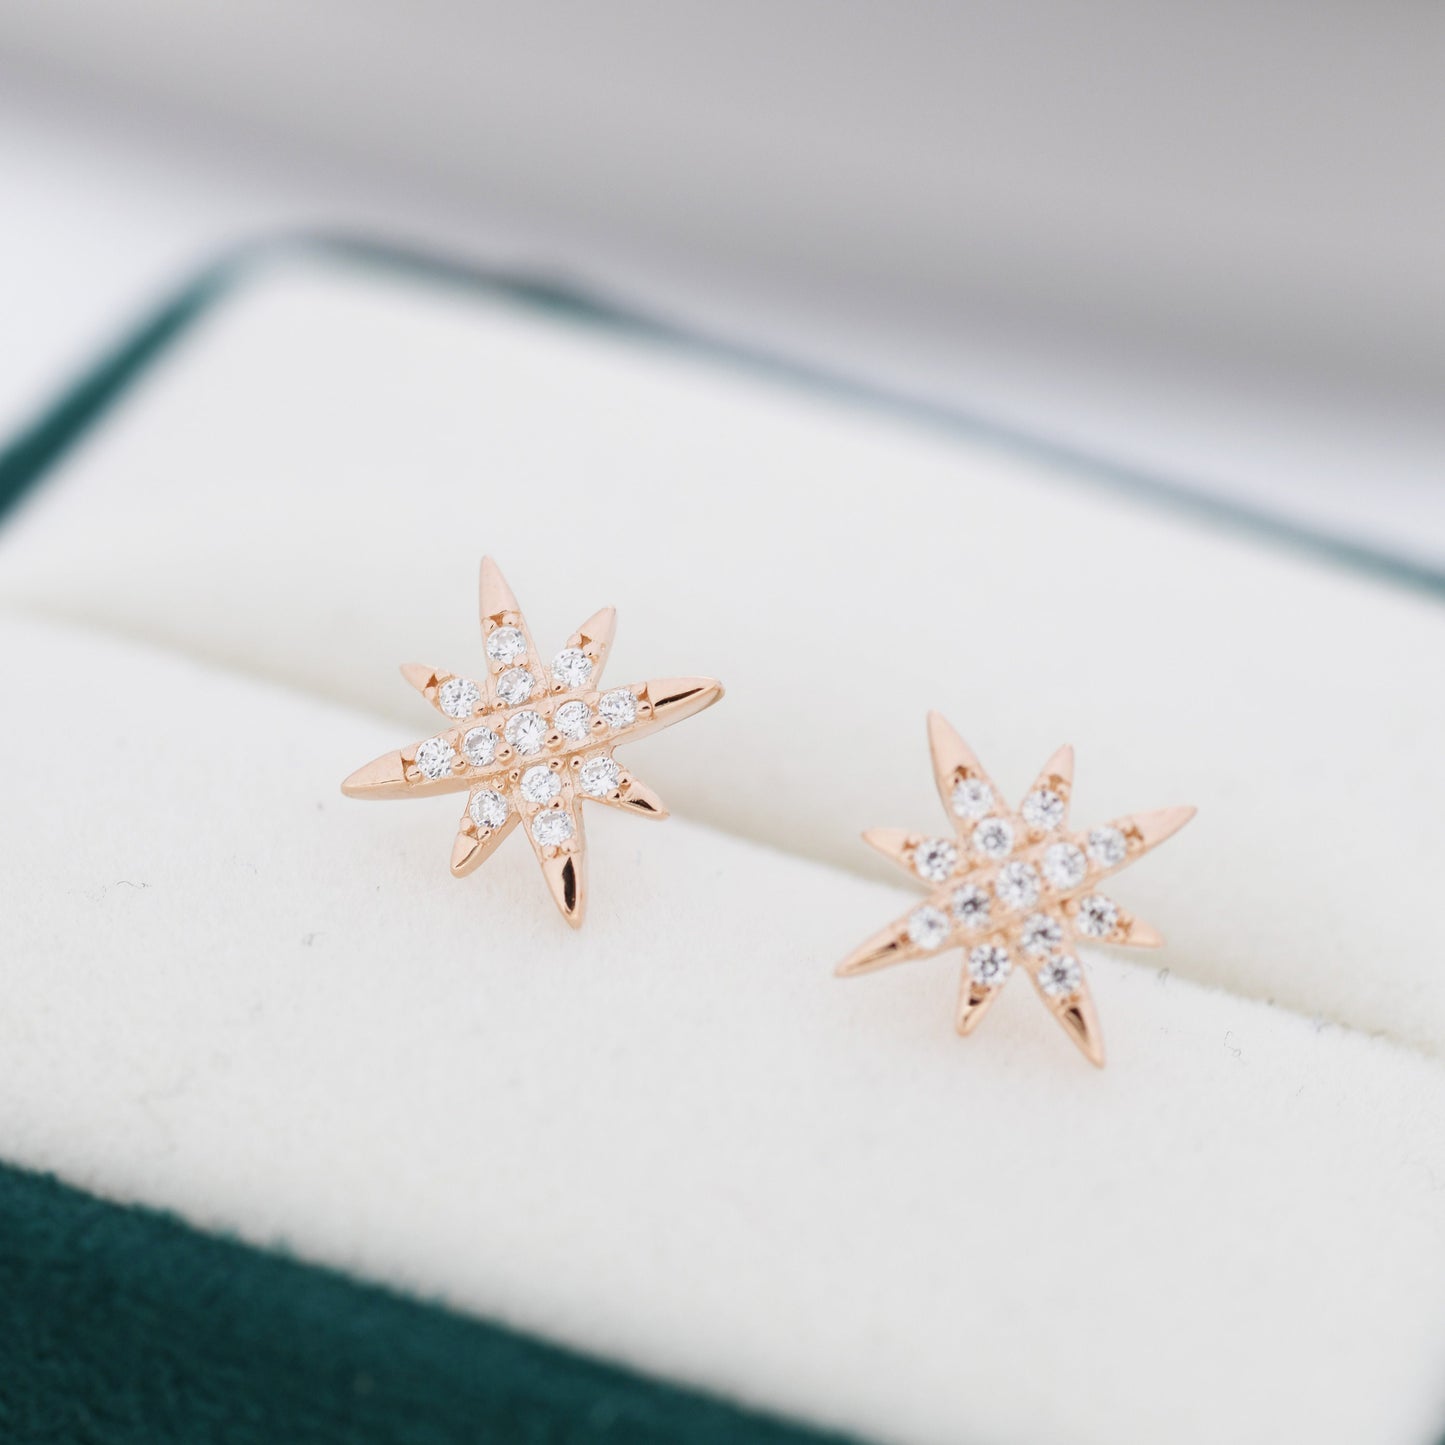 Starburst Stud Earrings in Sterling Silver with Sparkly CZ Crystals, North Star Earrings, Silver Gold and Rose Gold,  Celestial Jewellery